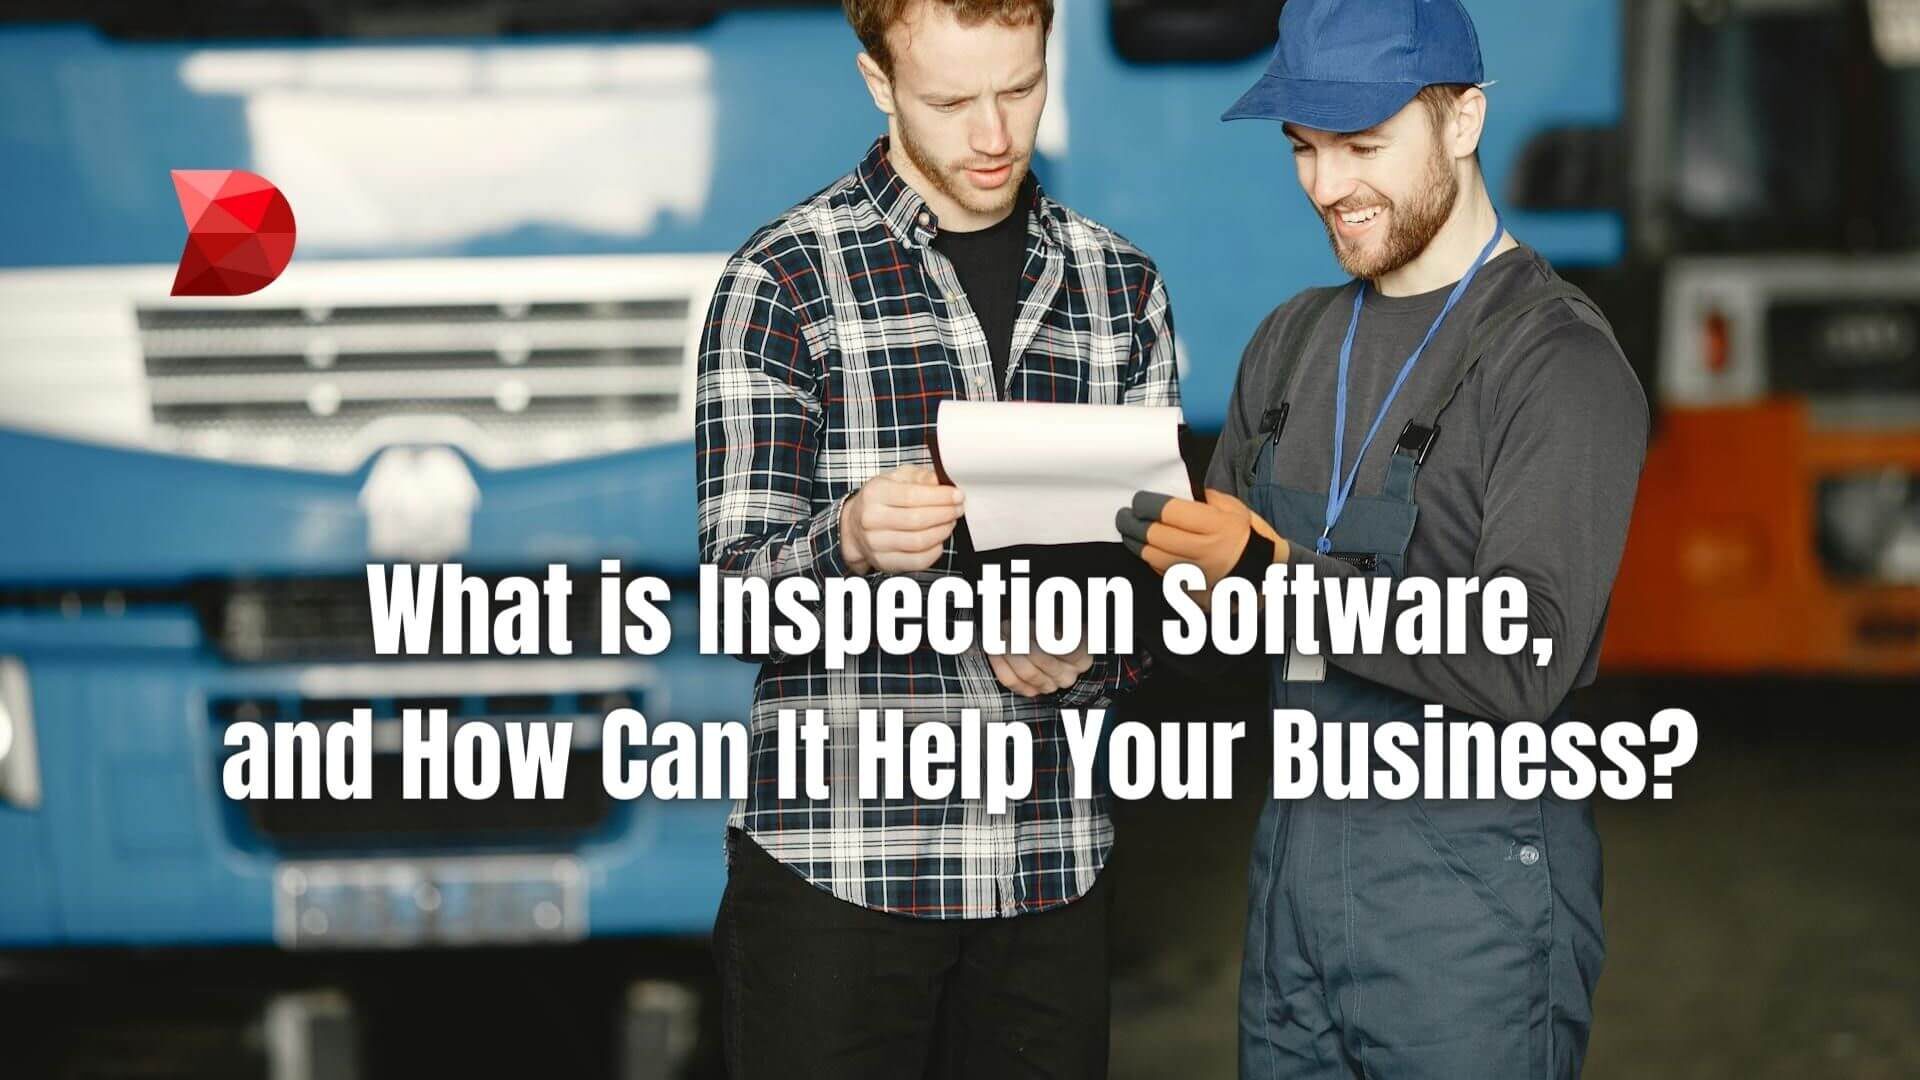 Optimize your business operations efficiently! Click here to discover the power of inspection software in streamlining operations.